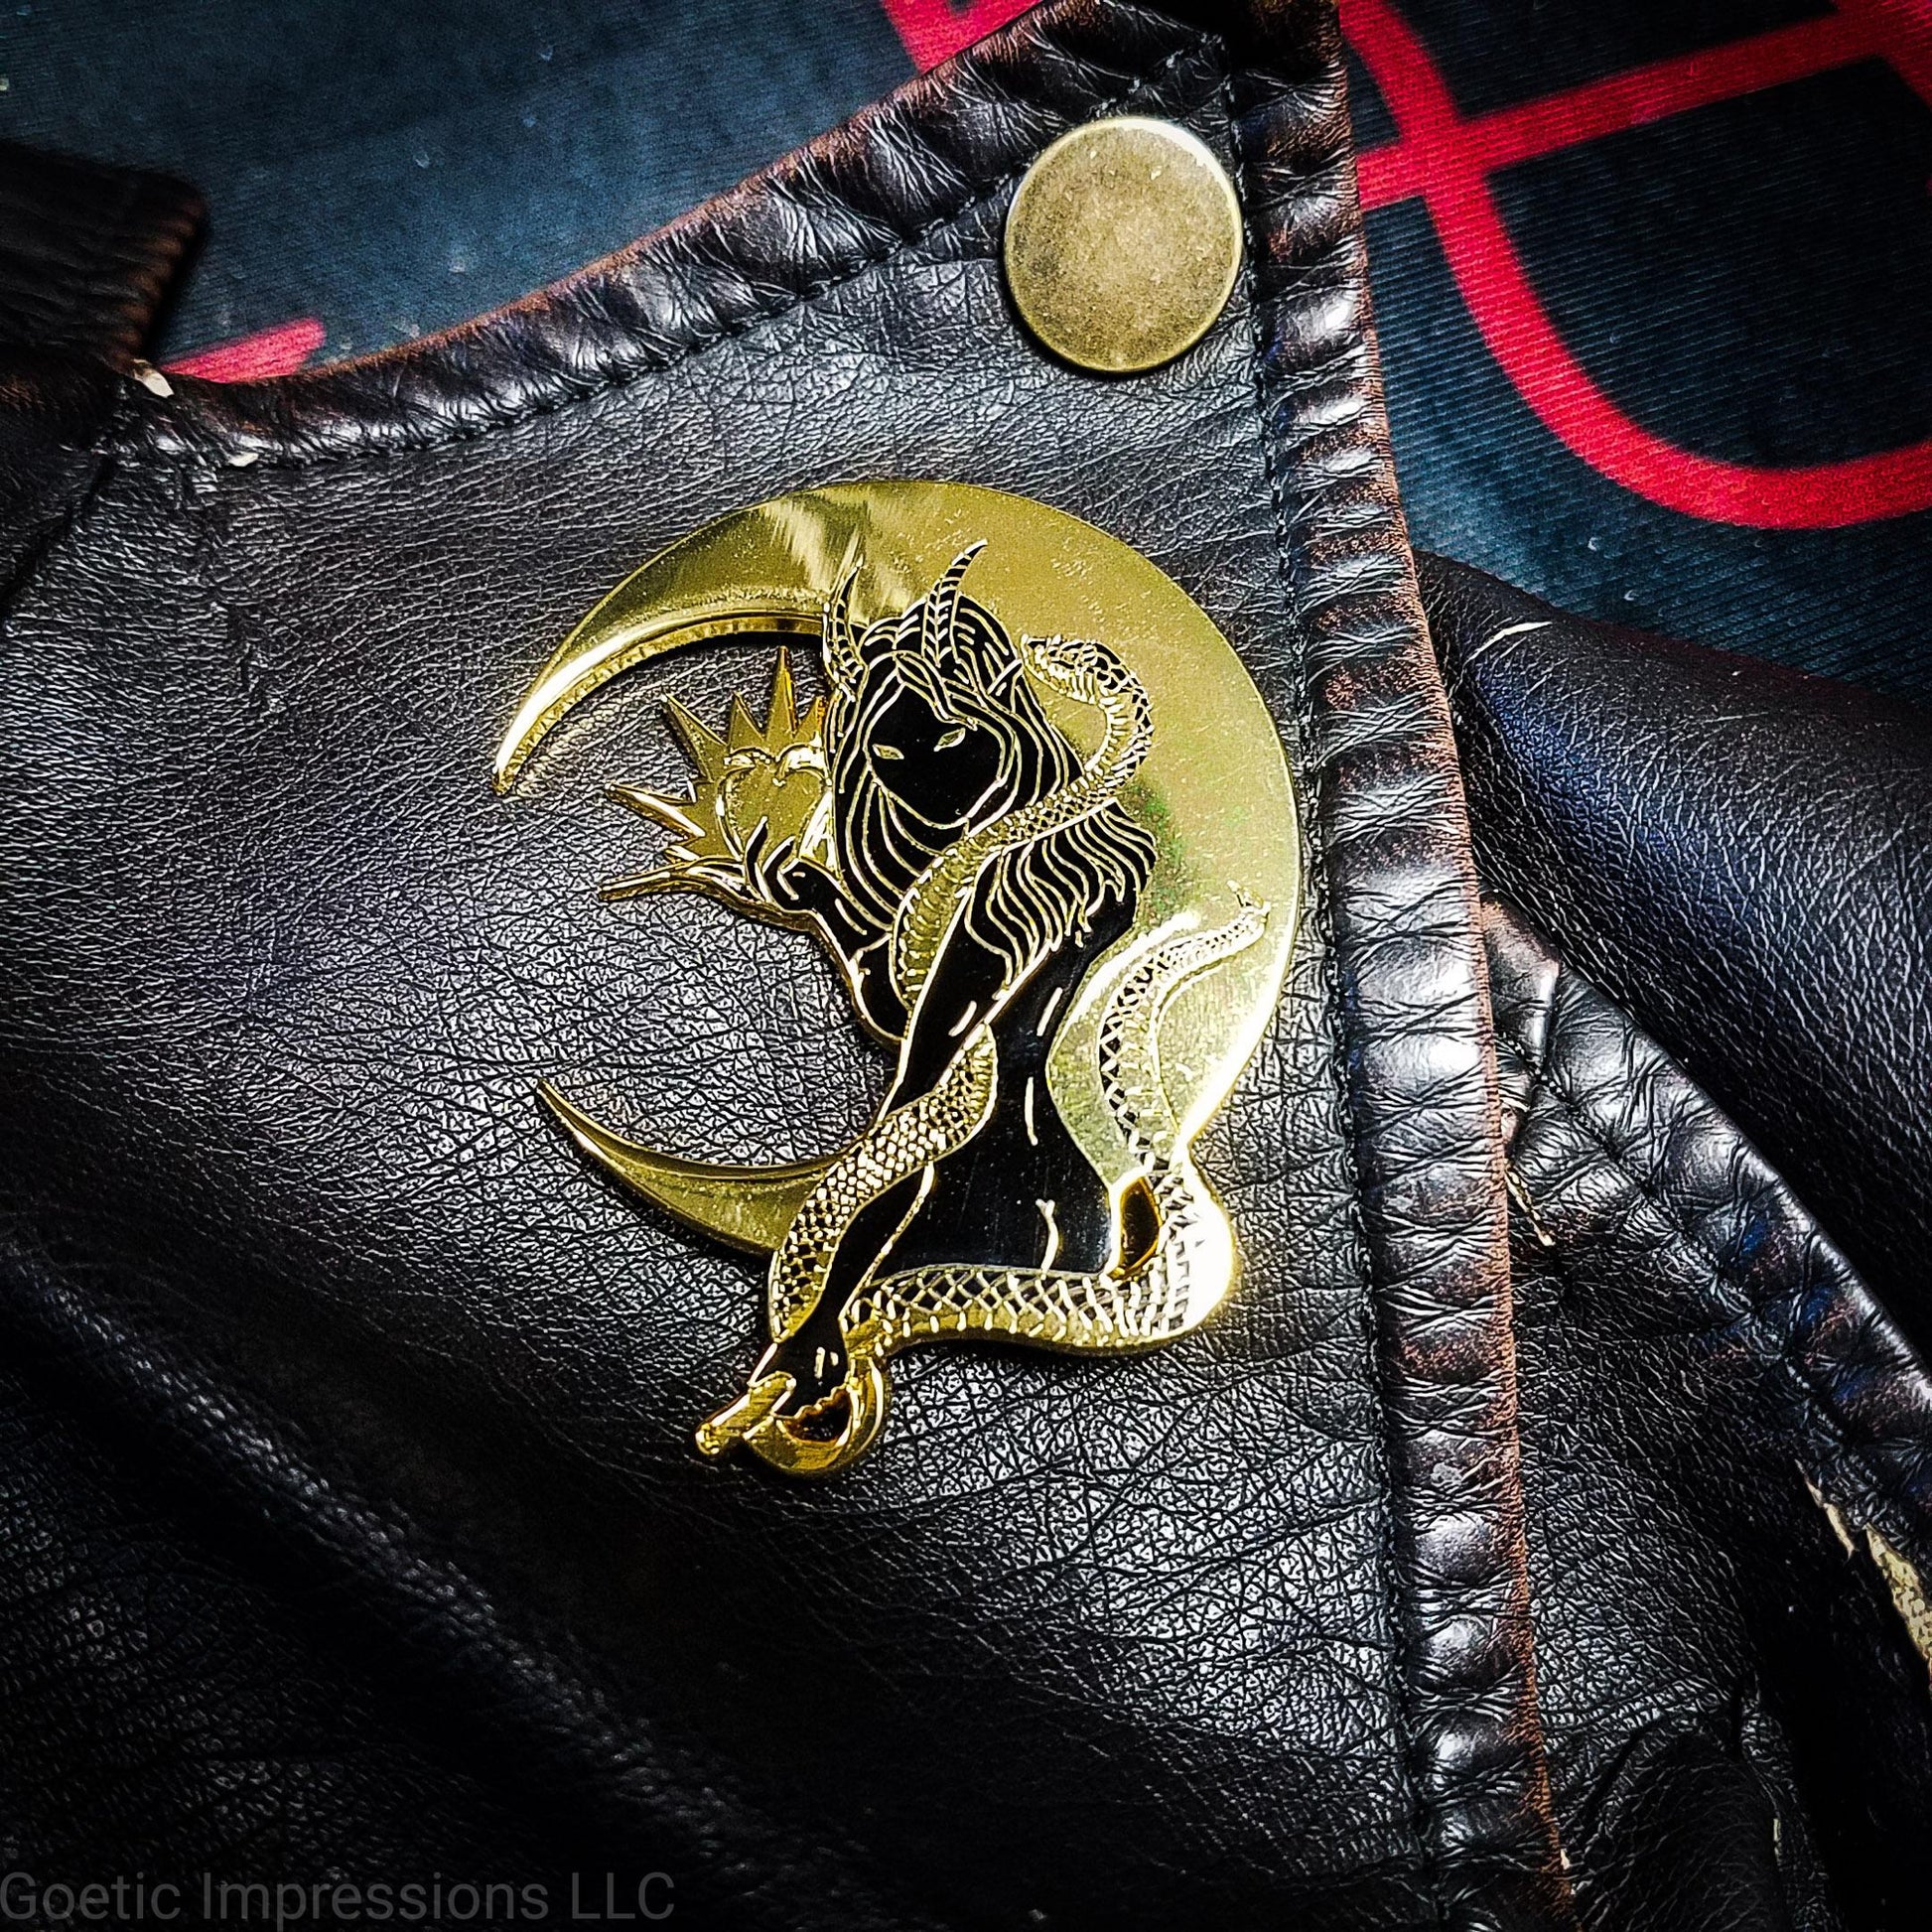 A black and gold hard enamel pin of Lilith. Lilith is holding a shining apple in one hand and a rod and circle in the other. Her one arm is coiled with a serpent. A cresent moon is behind her. The pin is on a brown leather jacket.